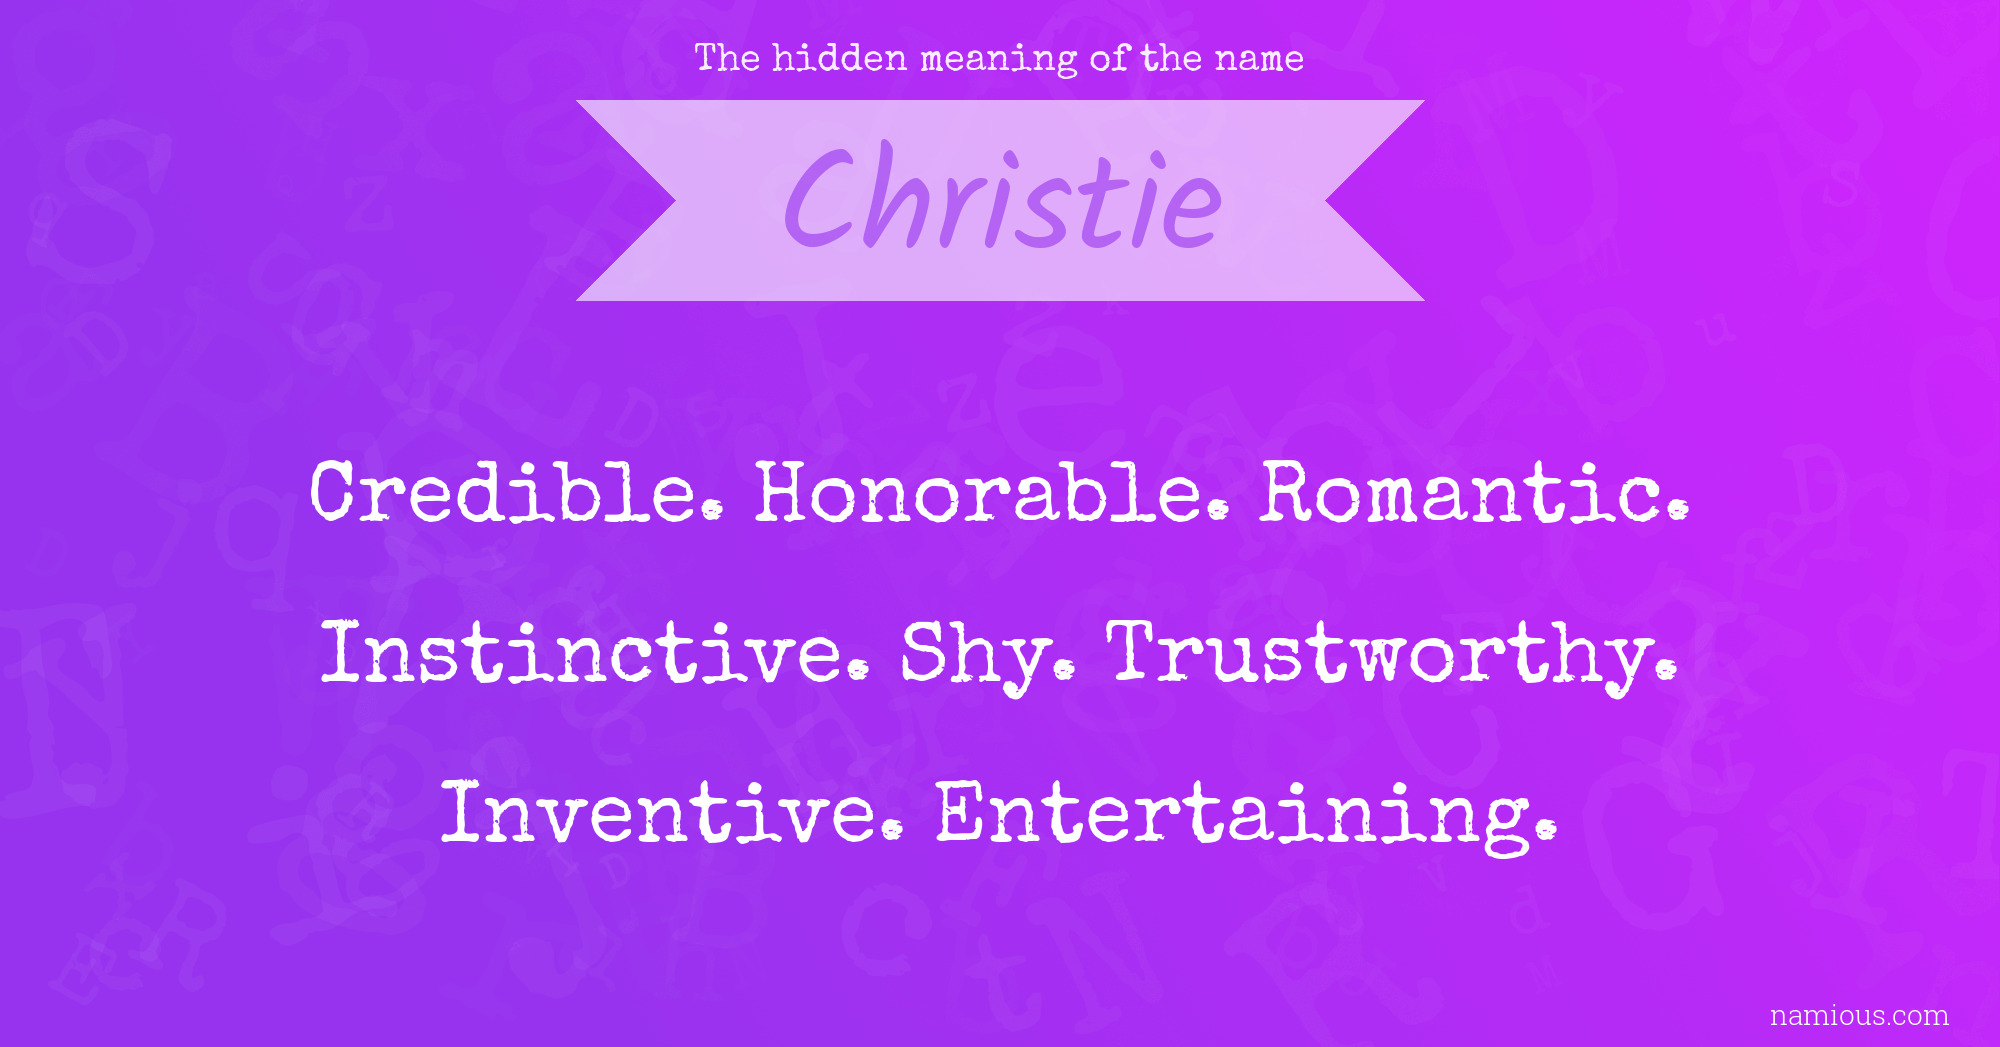 The hidden meaning of the name Christie